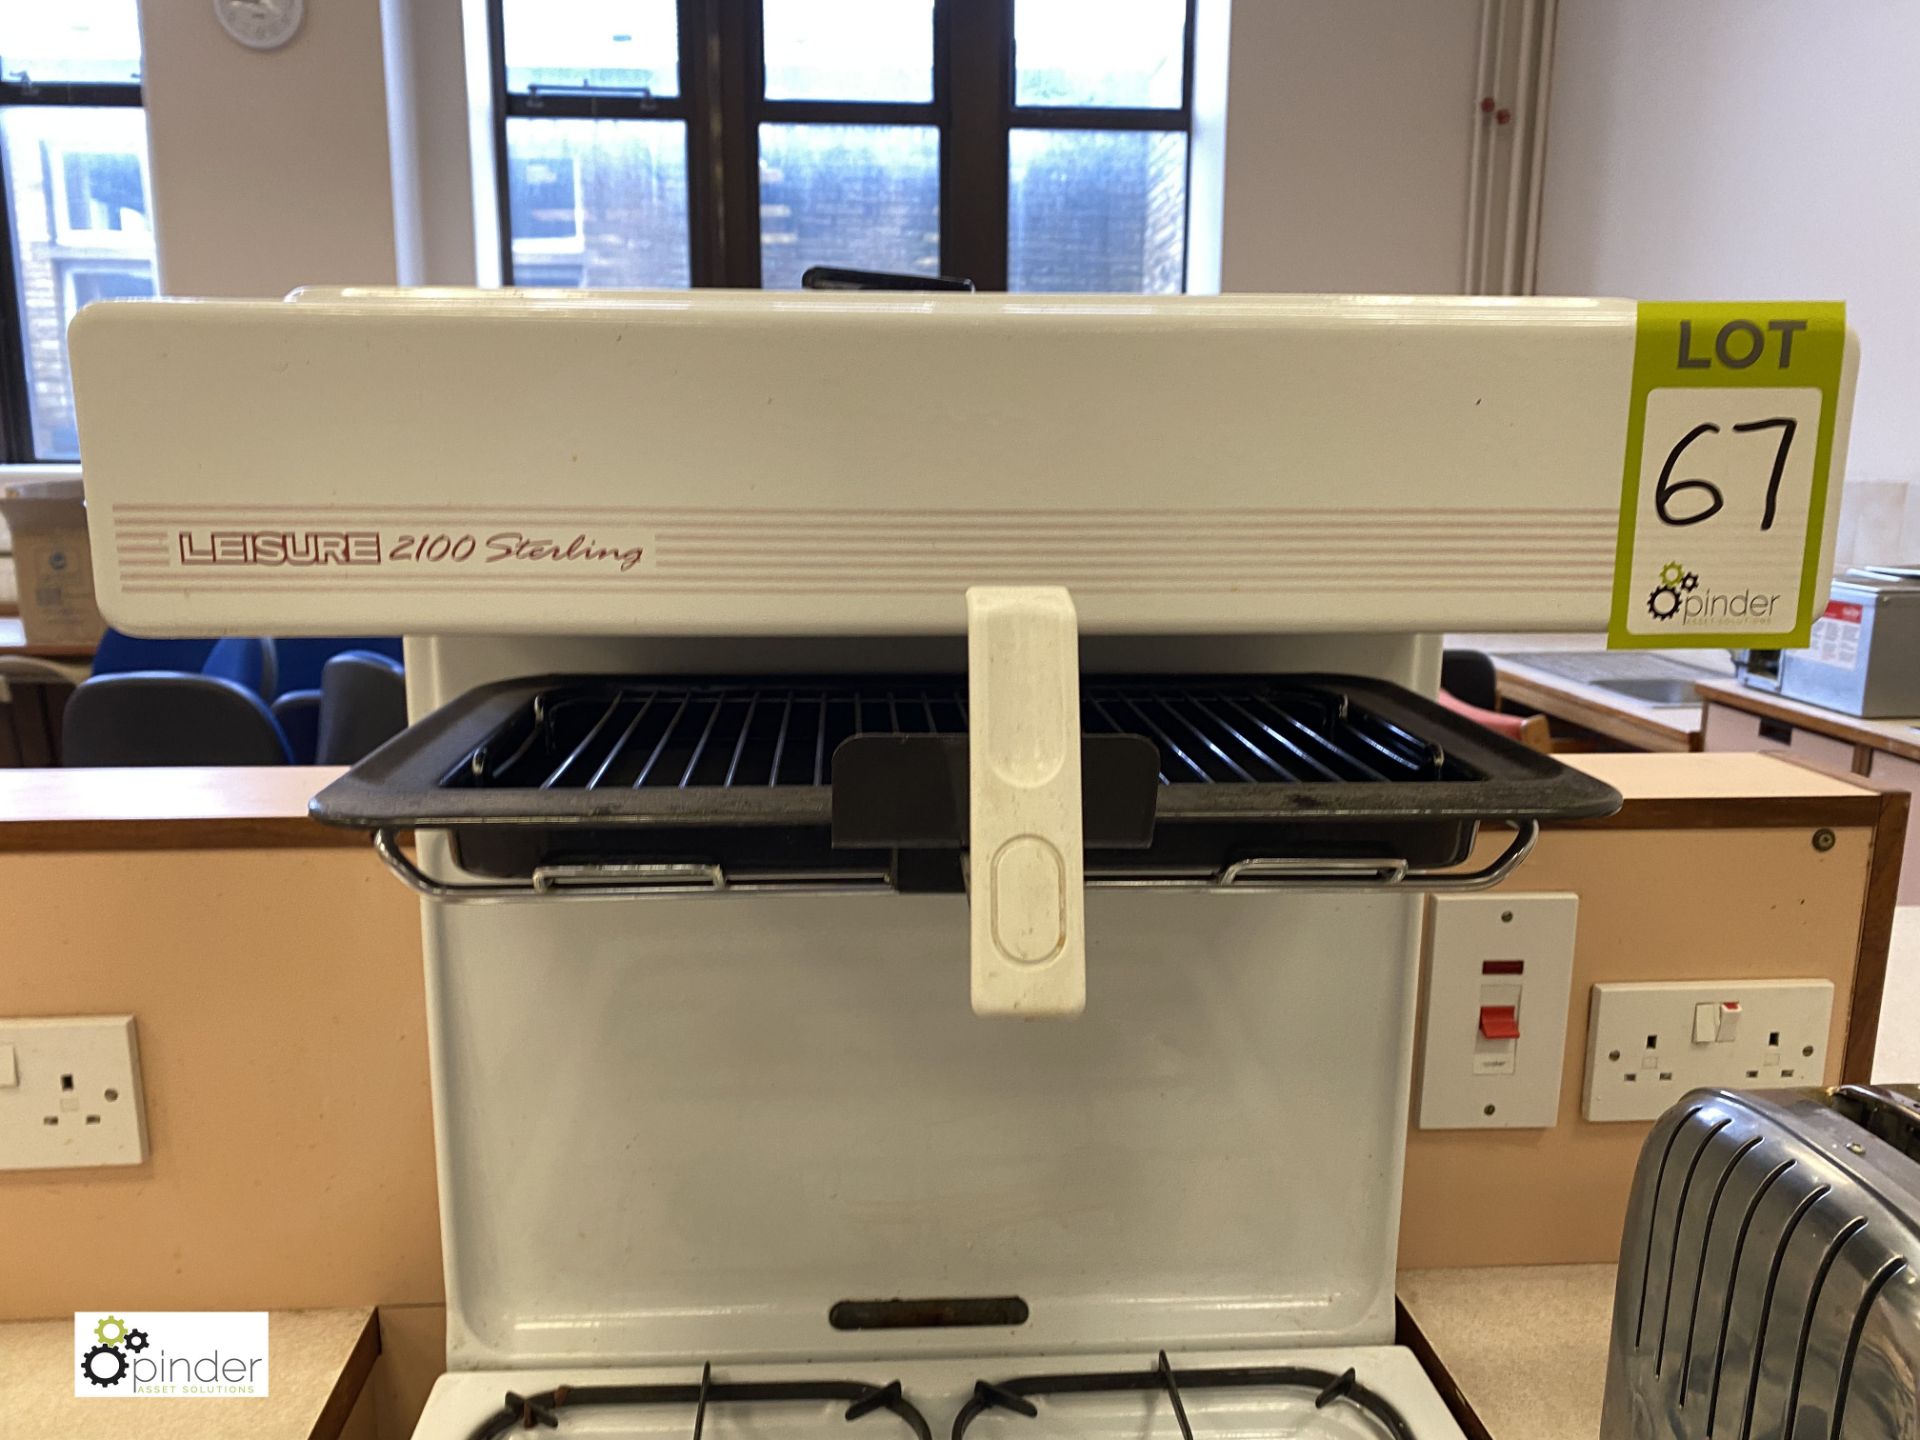 Leisure 2100 Sterling 4-ring Gas Oven and Grill (location: Level 2, B276 Room) - Image 3 of 3